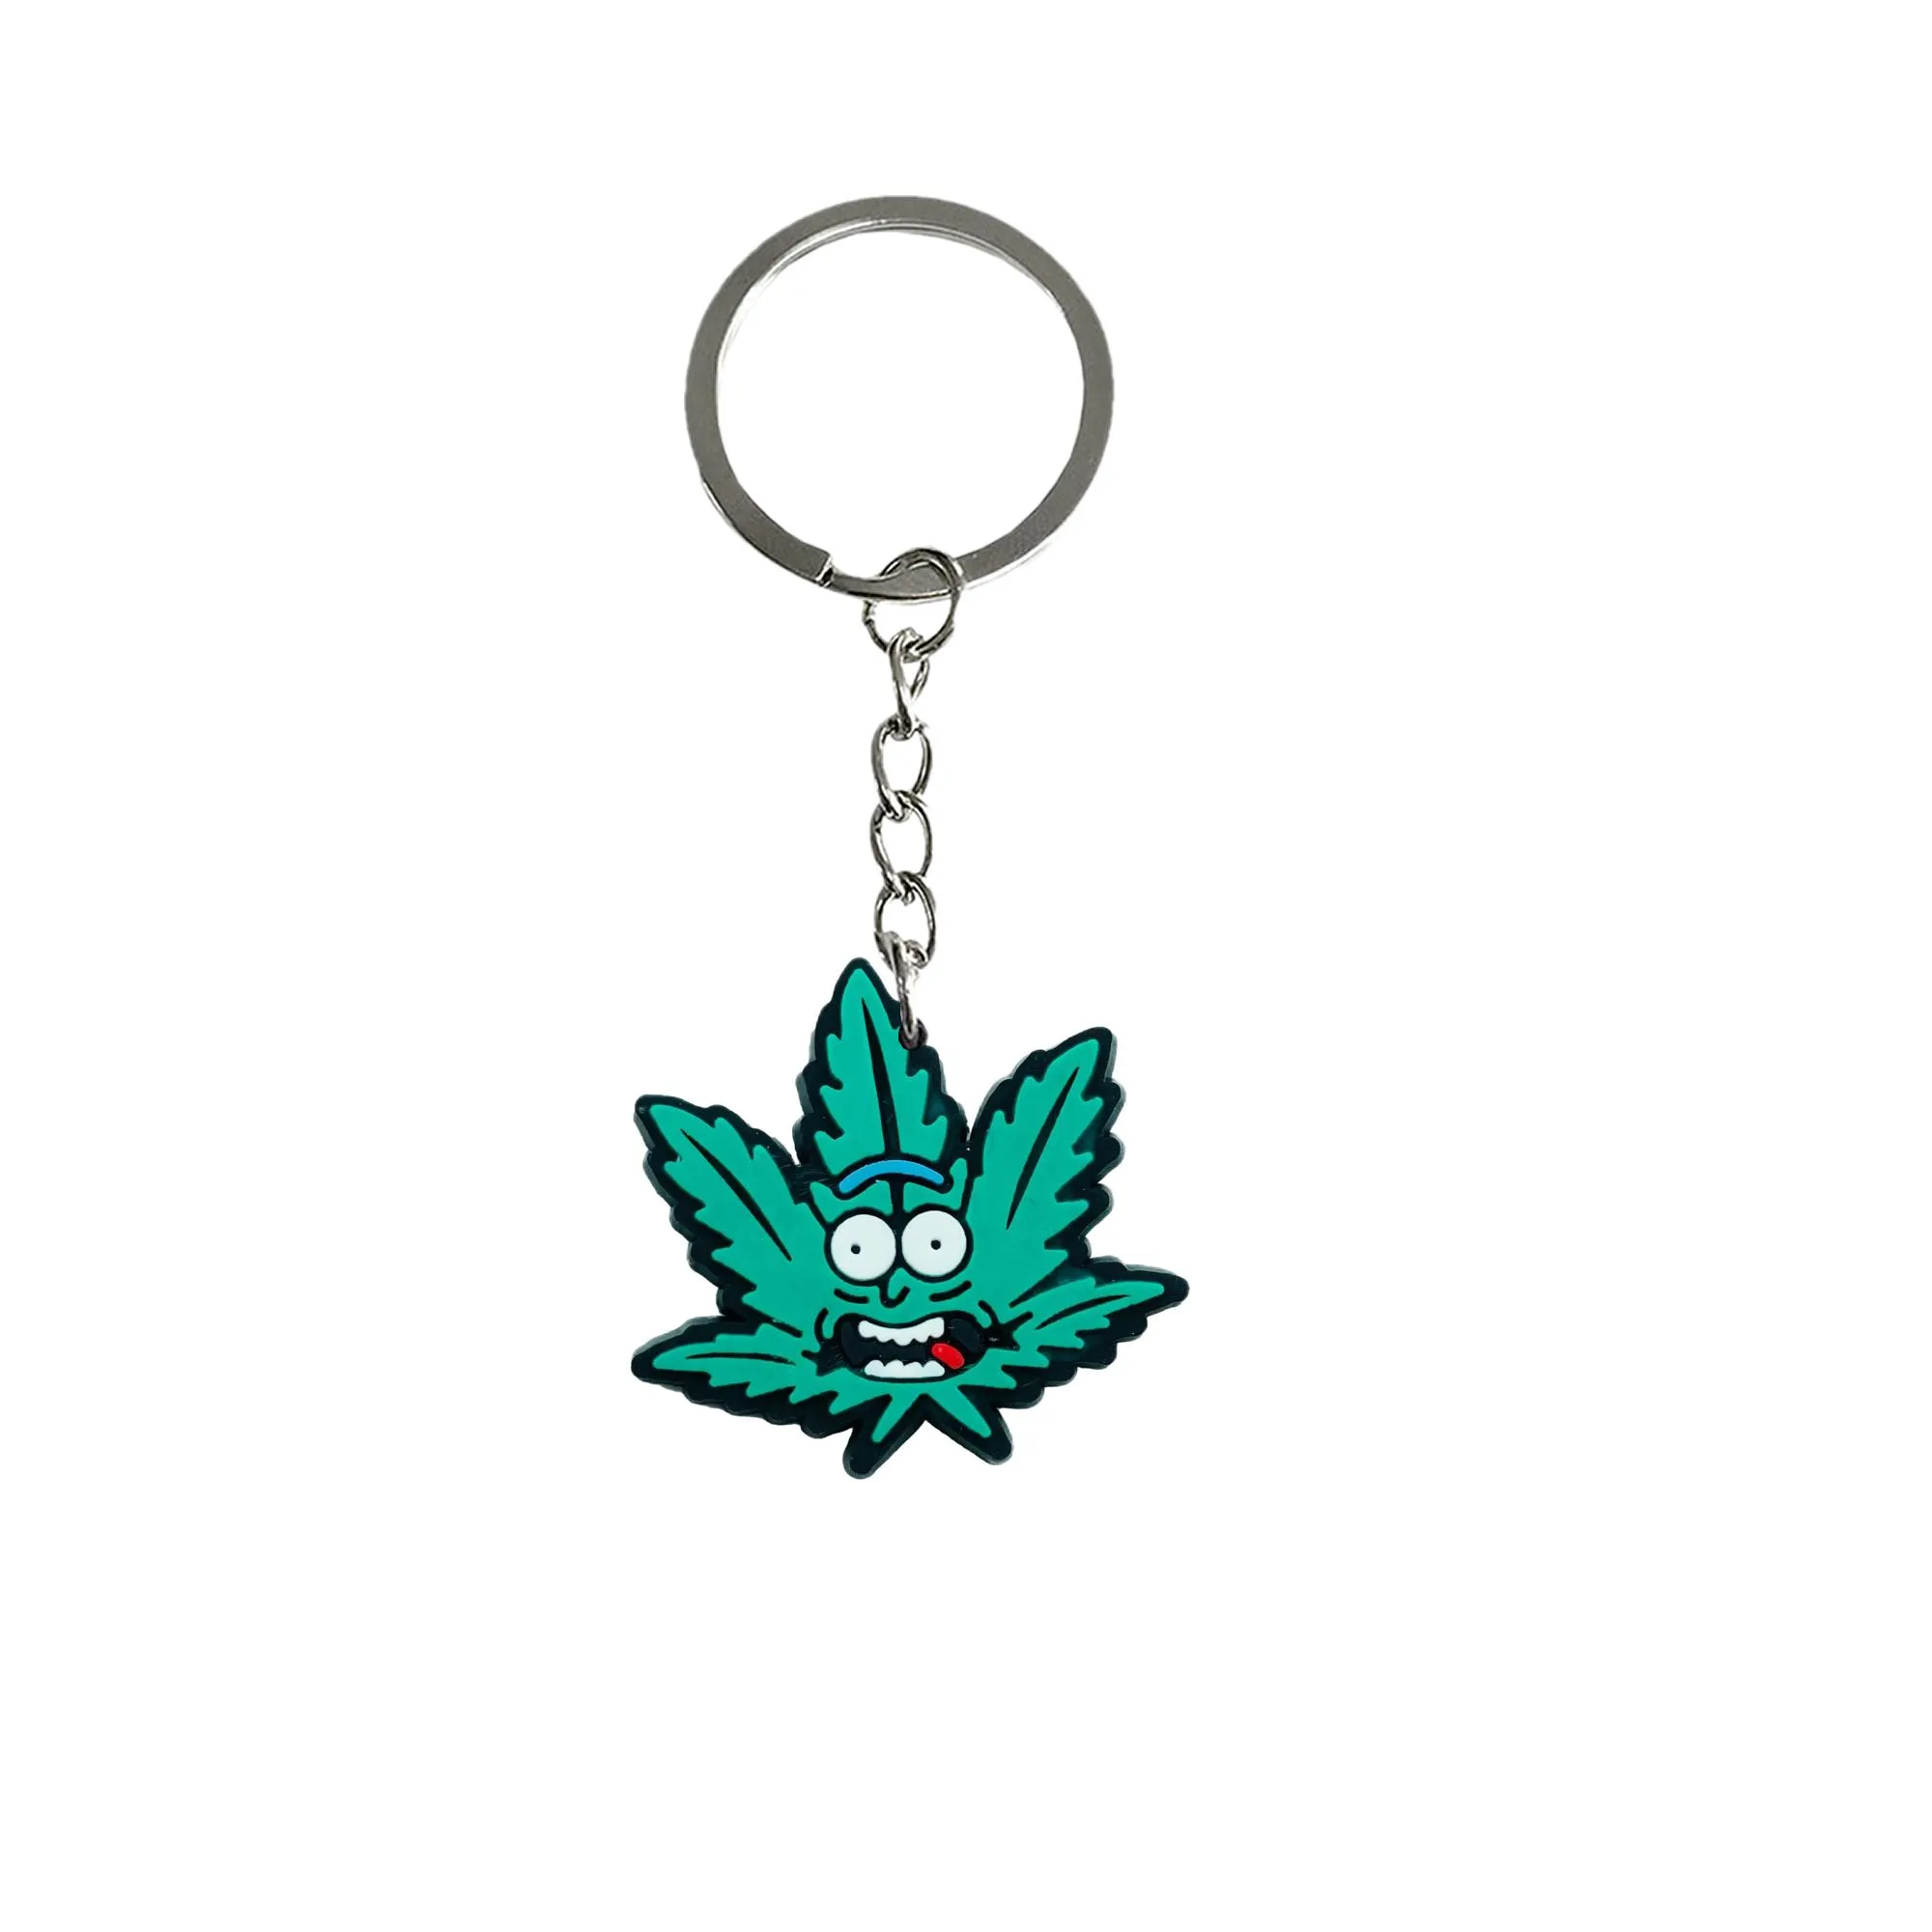 rick 36 keychain keychains for boys keyrings bags keyring classroom school day birthday party supplies gift suitable schoolbag tags goodie bag stuffer christmas gifts and holiday charms backpack car